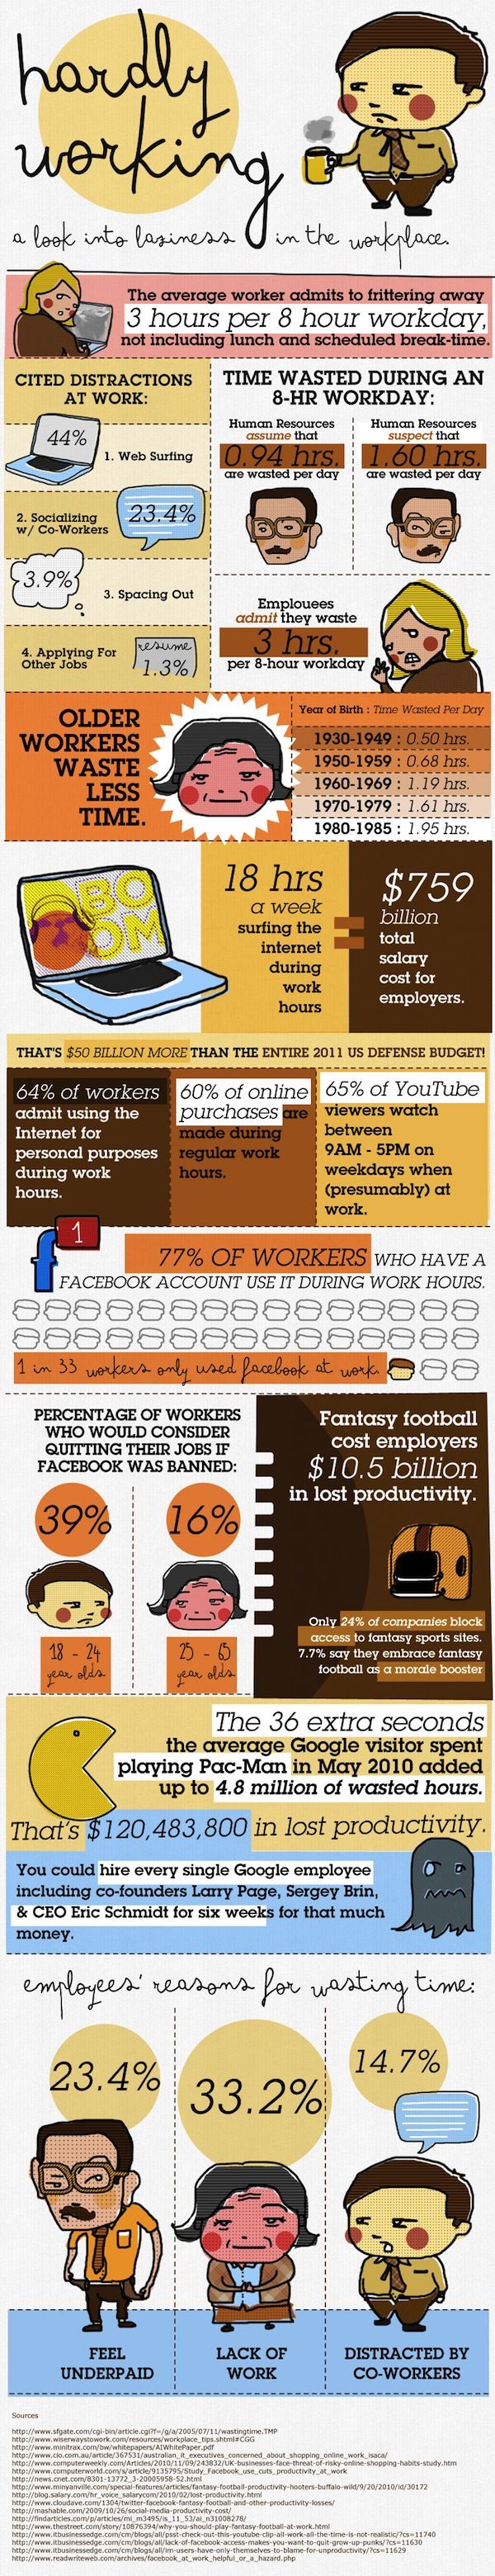 Stats on Wasting Time at Work [INFOGRAPHIC]